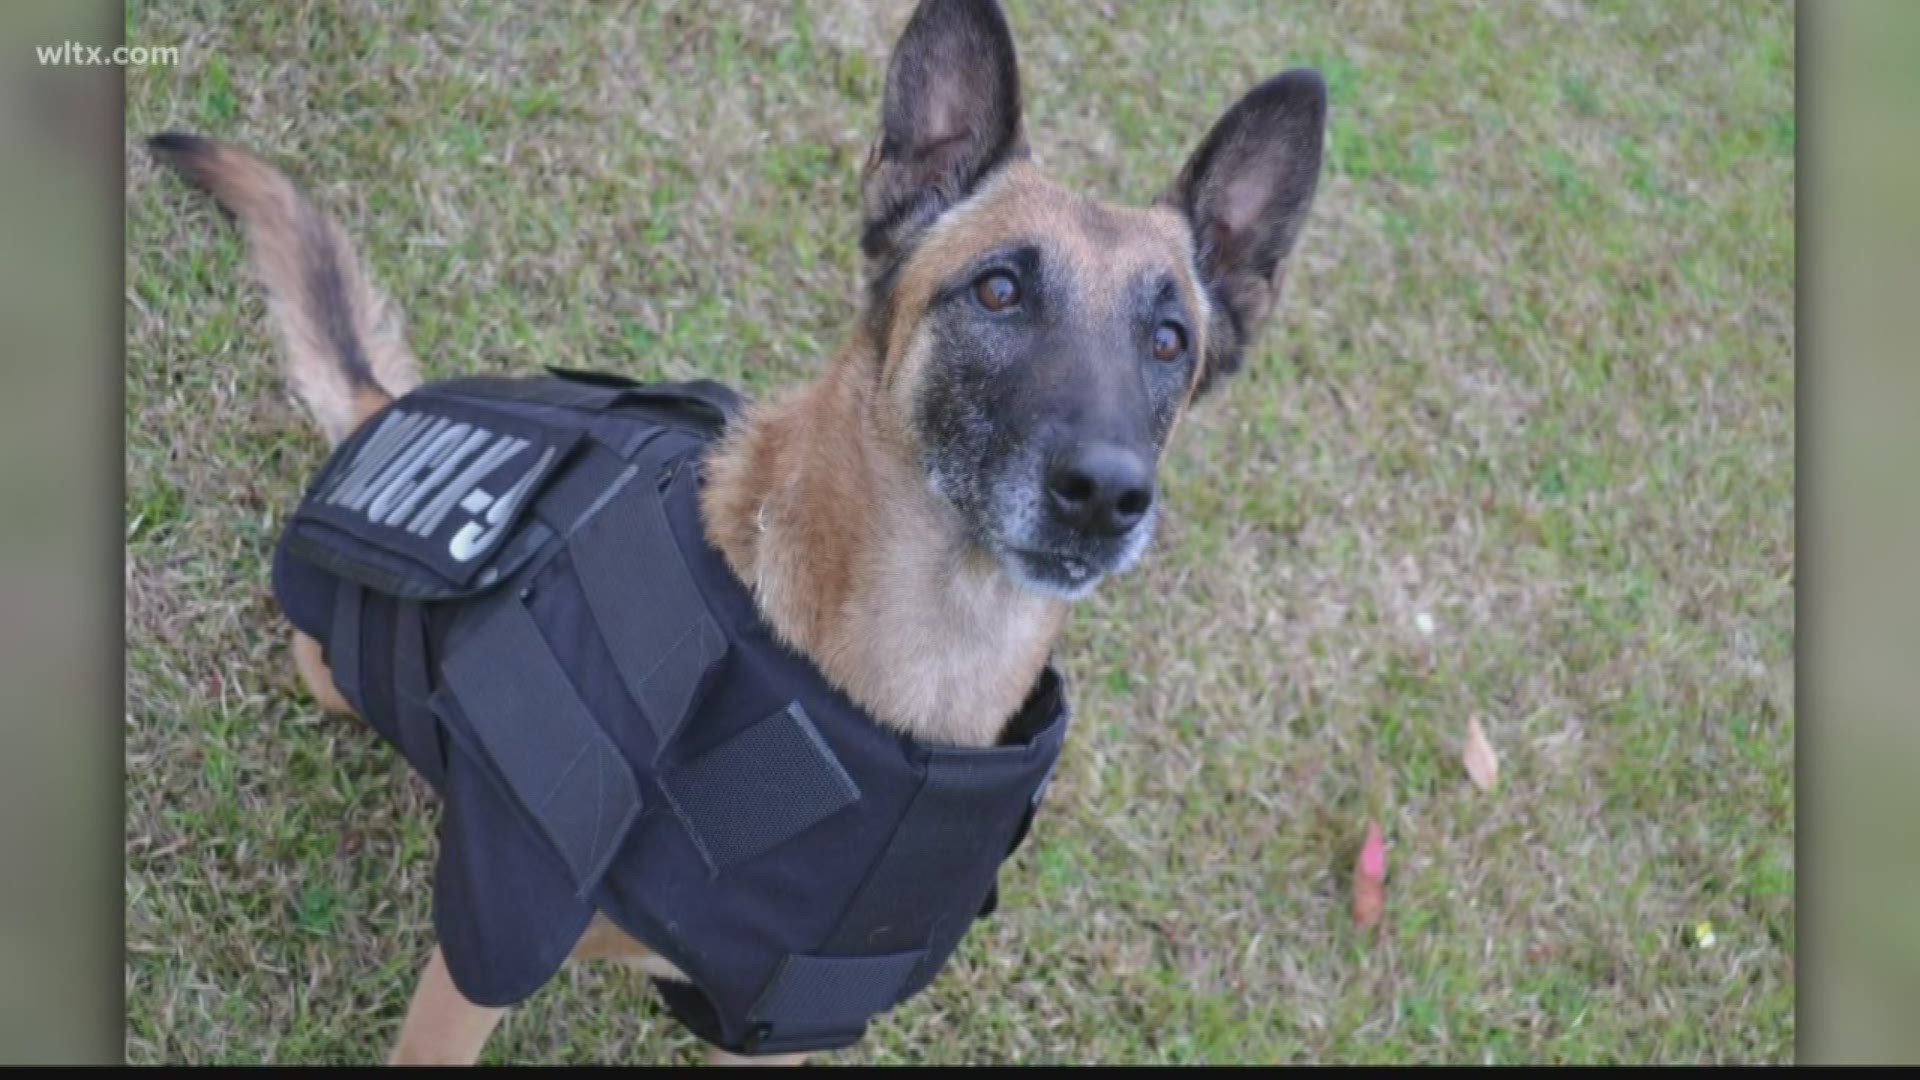 Retired K-9 Laika passed away on Tuesday, she was an explosive detection dog for 9 years.